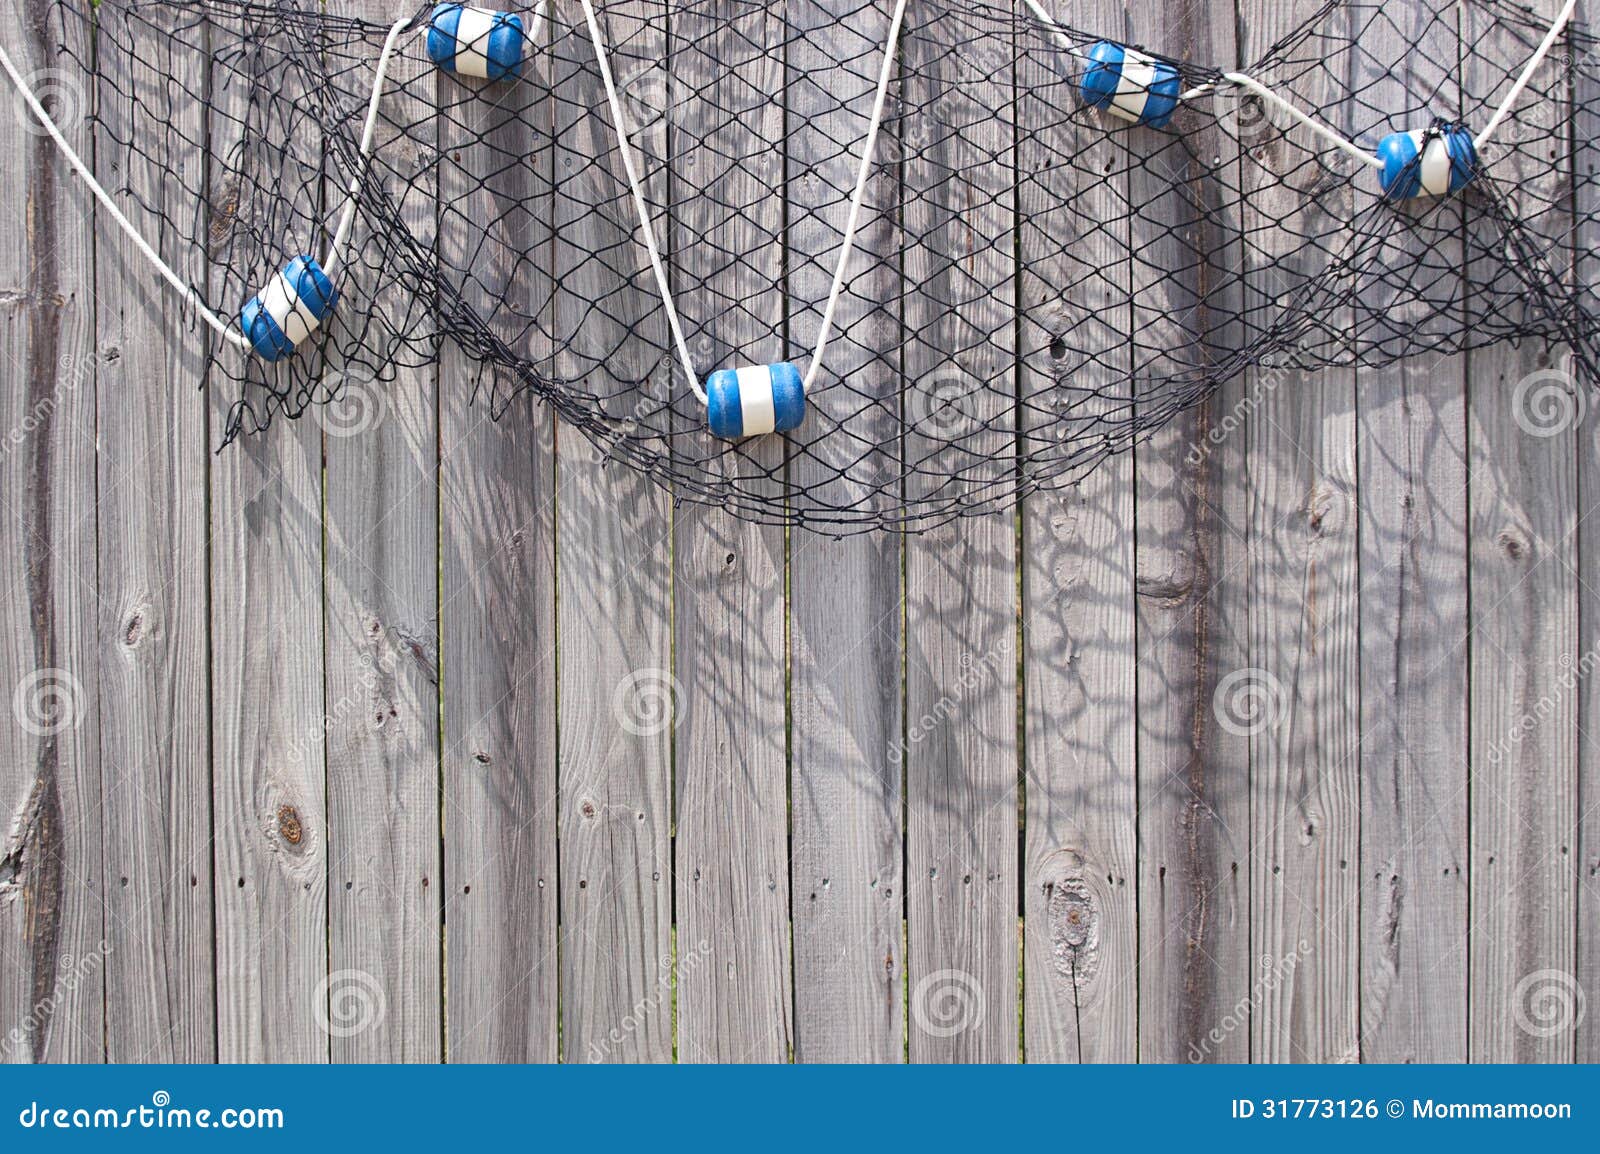 https://thumbs.dreamstime.com/z/fish-net-floats-wooden-fence-blue-white-hanging-31773126.jpg